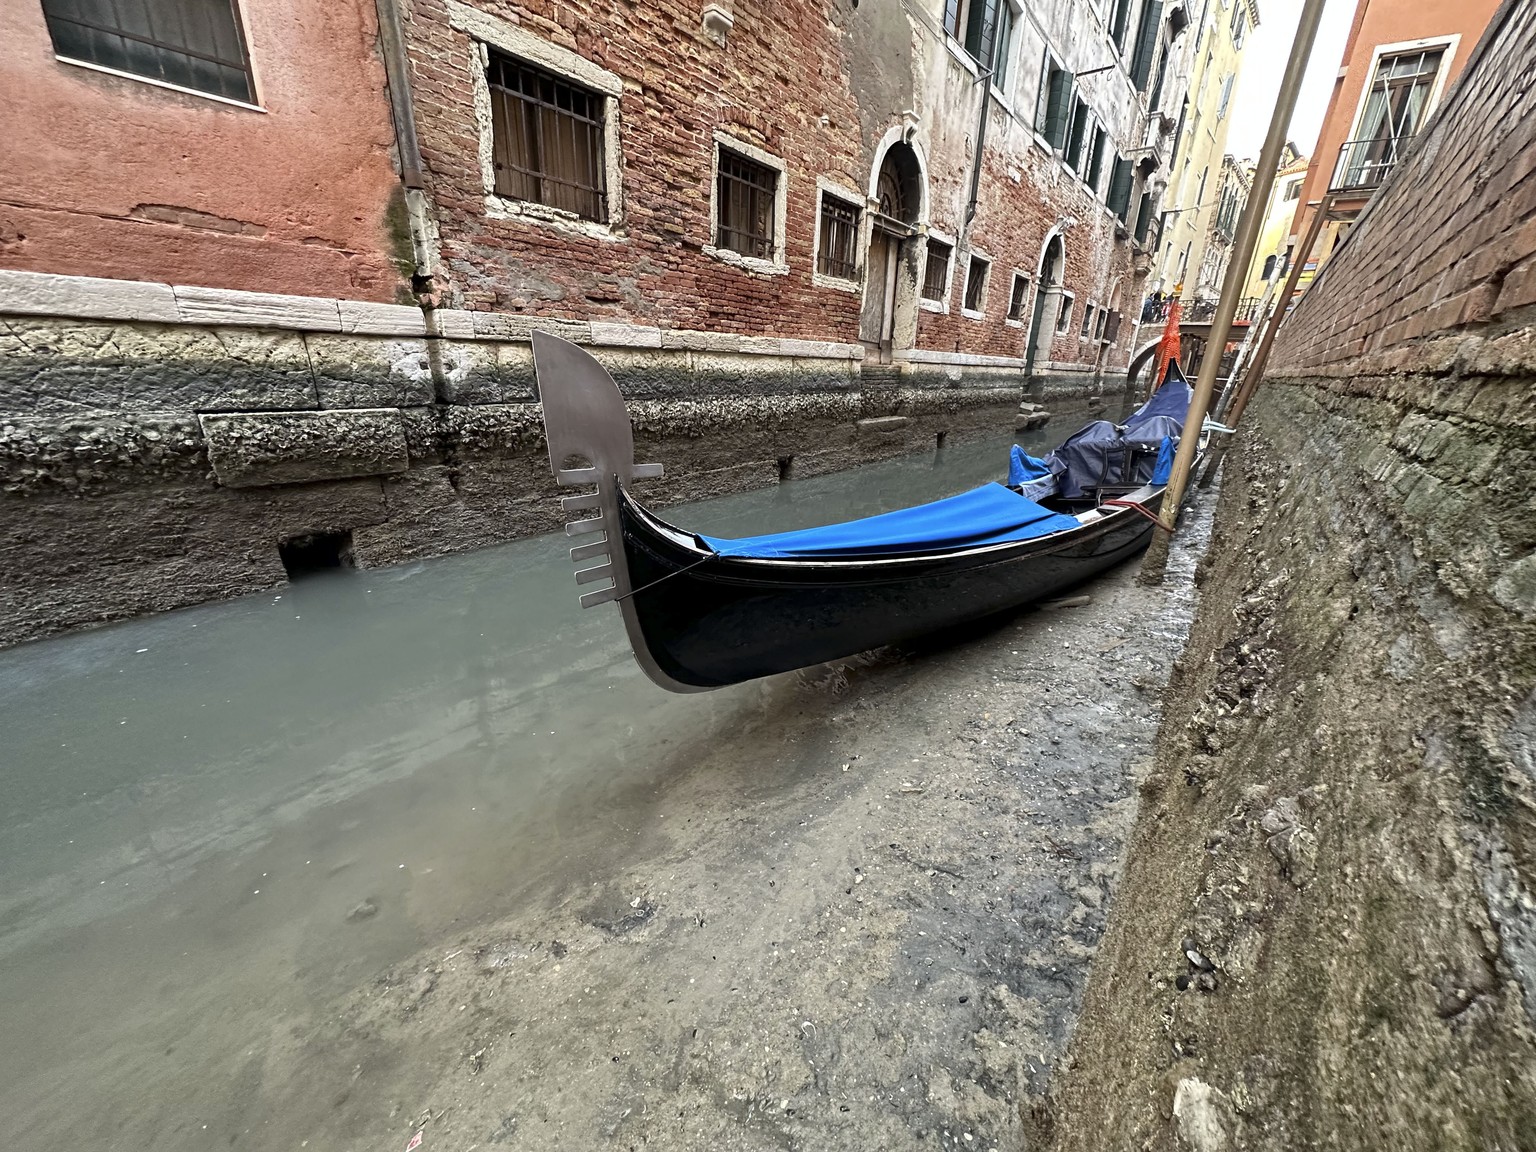 A gondola is docked on a dry canal during a low tide in Venice, Italy, Monday, Feb. 20, 2023. (AP Photo/Luigi Costantini)